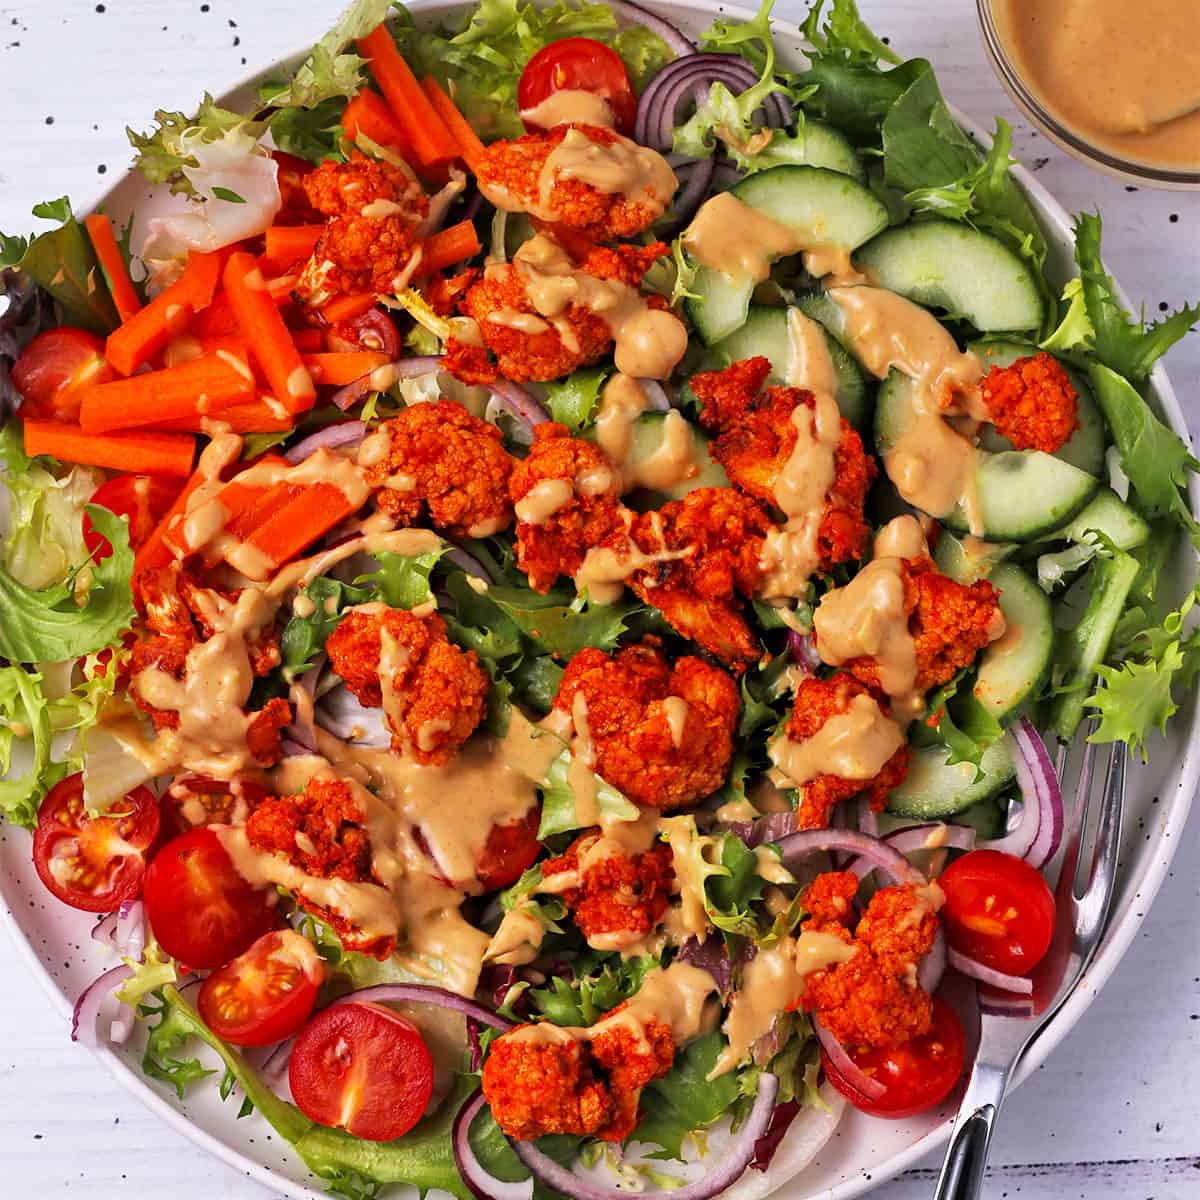 Spicy cauliflower wings over a green vegetable salad with peanut dressing.